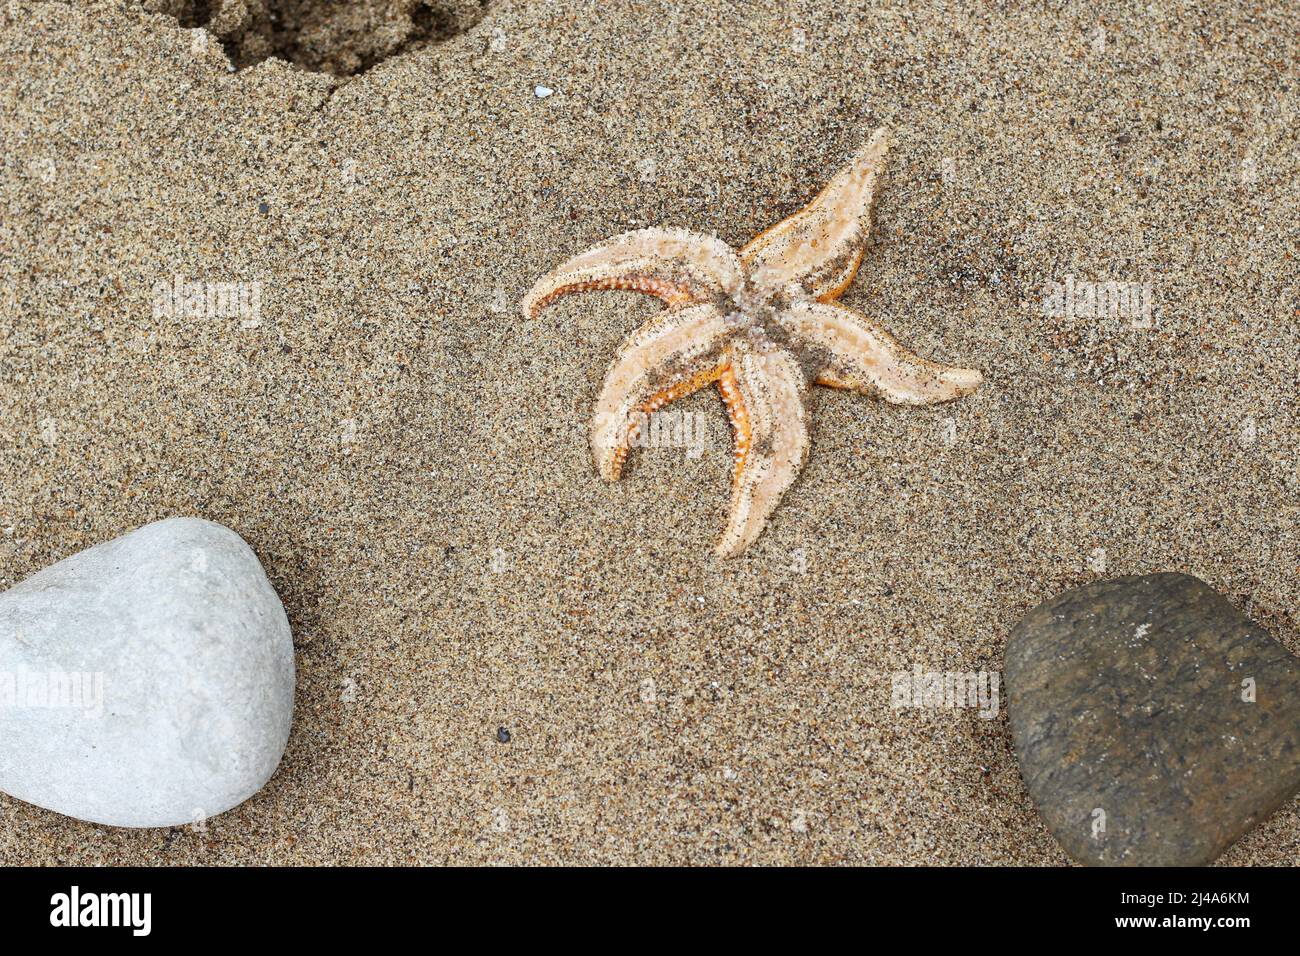 A washed up starfish on the beach at Ssandsend, Yorkshire Stock Photo